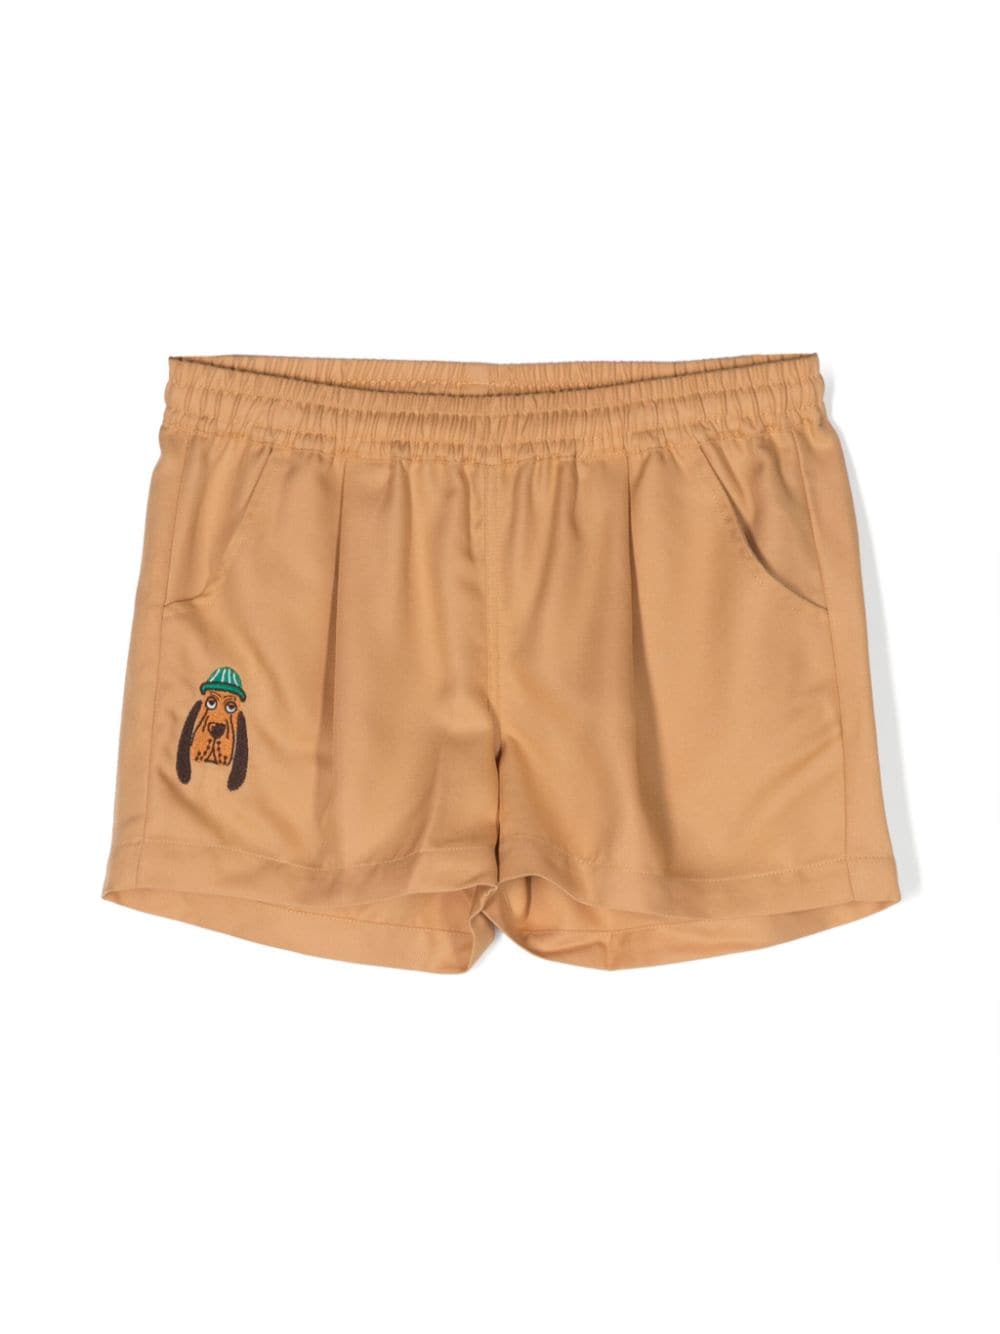 Shorts Bloodhound bambino colore marrone toffee